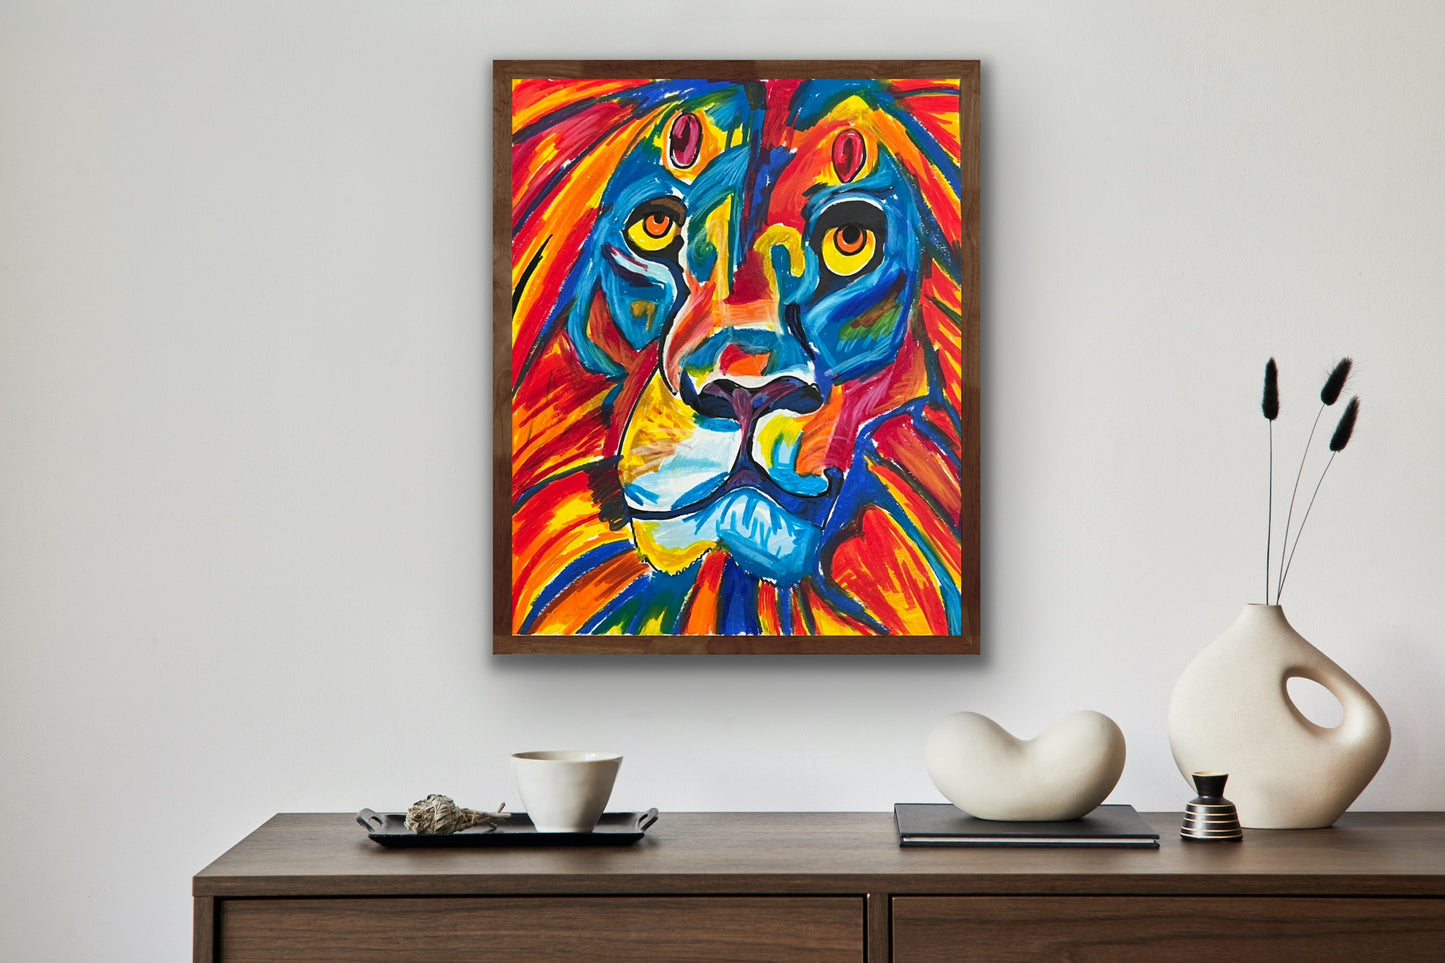 Colorful Lion - Print, Poster or Stretched Canvas Print in more sizes